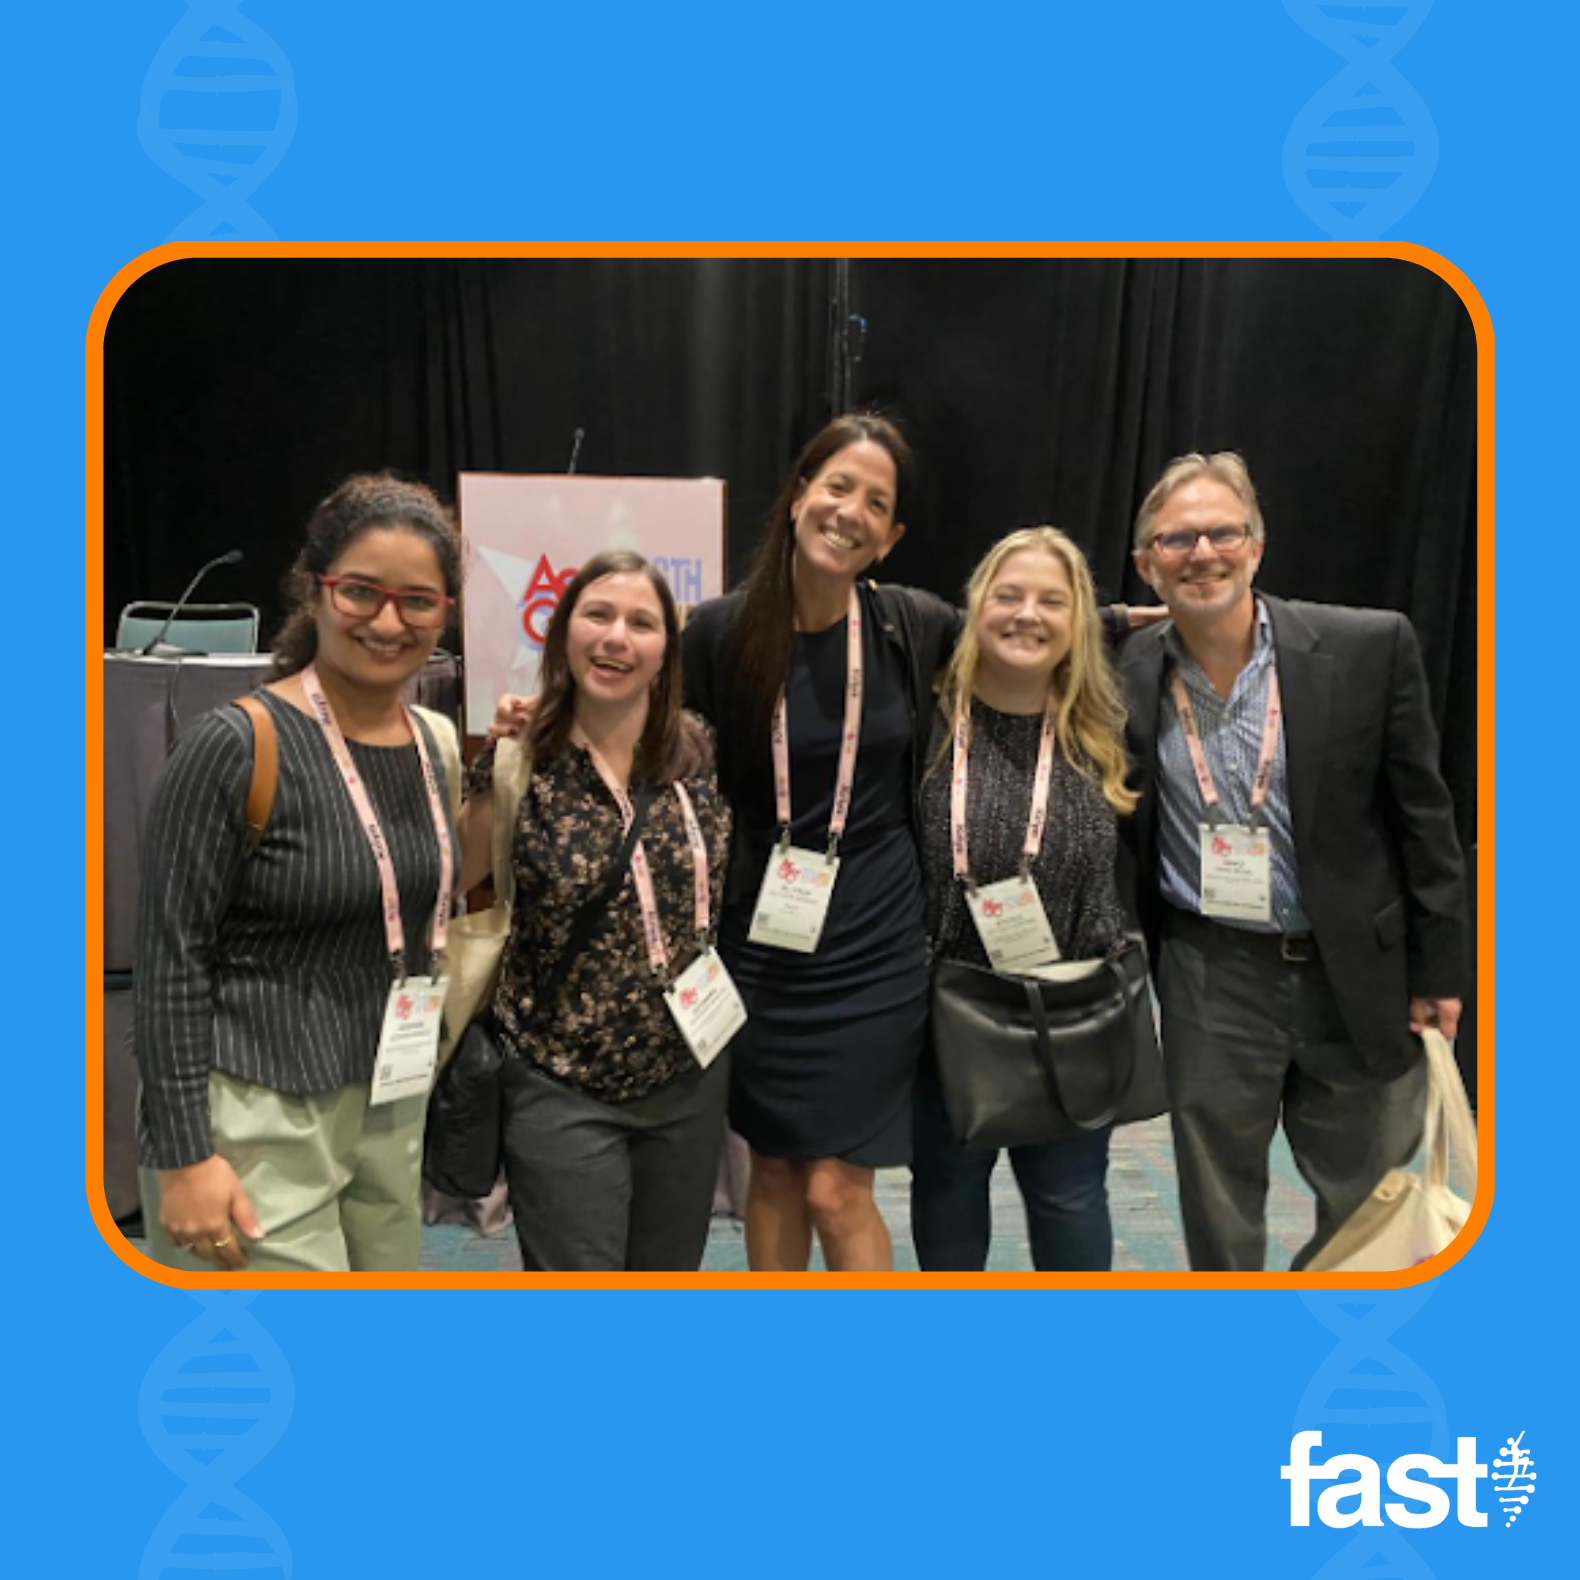 The FAST team at the American Society of Gene & Cell Therapy’s annual scientific meeting